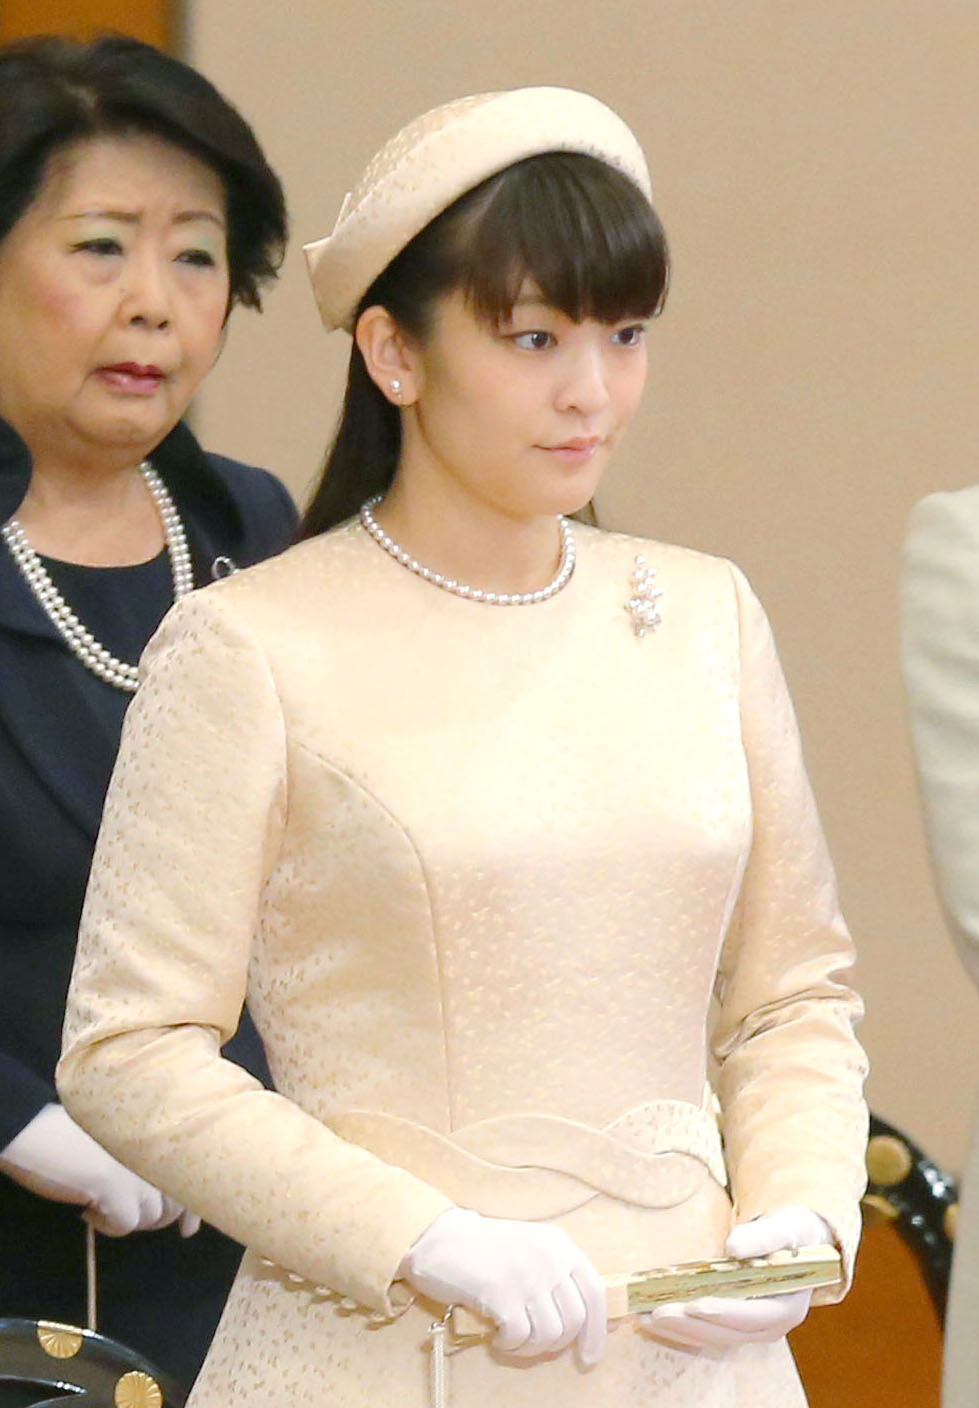 Princess Mako, the first grandchild of Japanese Emperor Akihito and the elder daughter of Prince Akishino, attends the annual New Year Poetry Reading Ceremony at the Imperial Palace in Tokyo in this photo taken on January 13, 2017. The 25-year-old princess is set to become engaged to a man who was in the same class year as her at Tokyo's International Christian University. (Kyodo)
==Kyodo